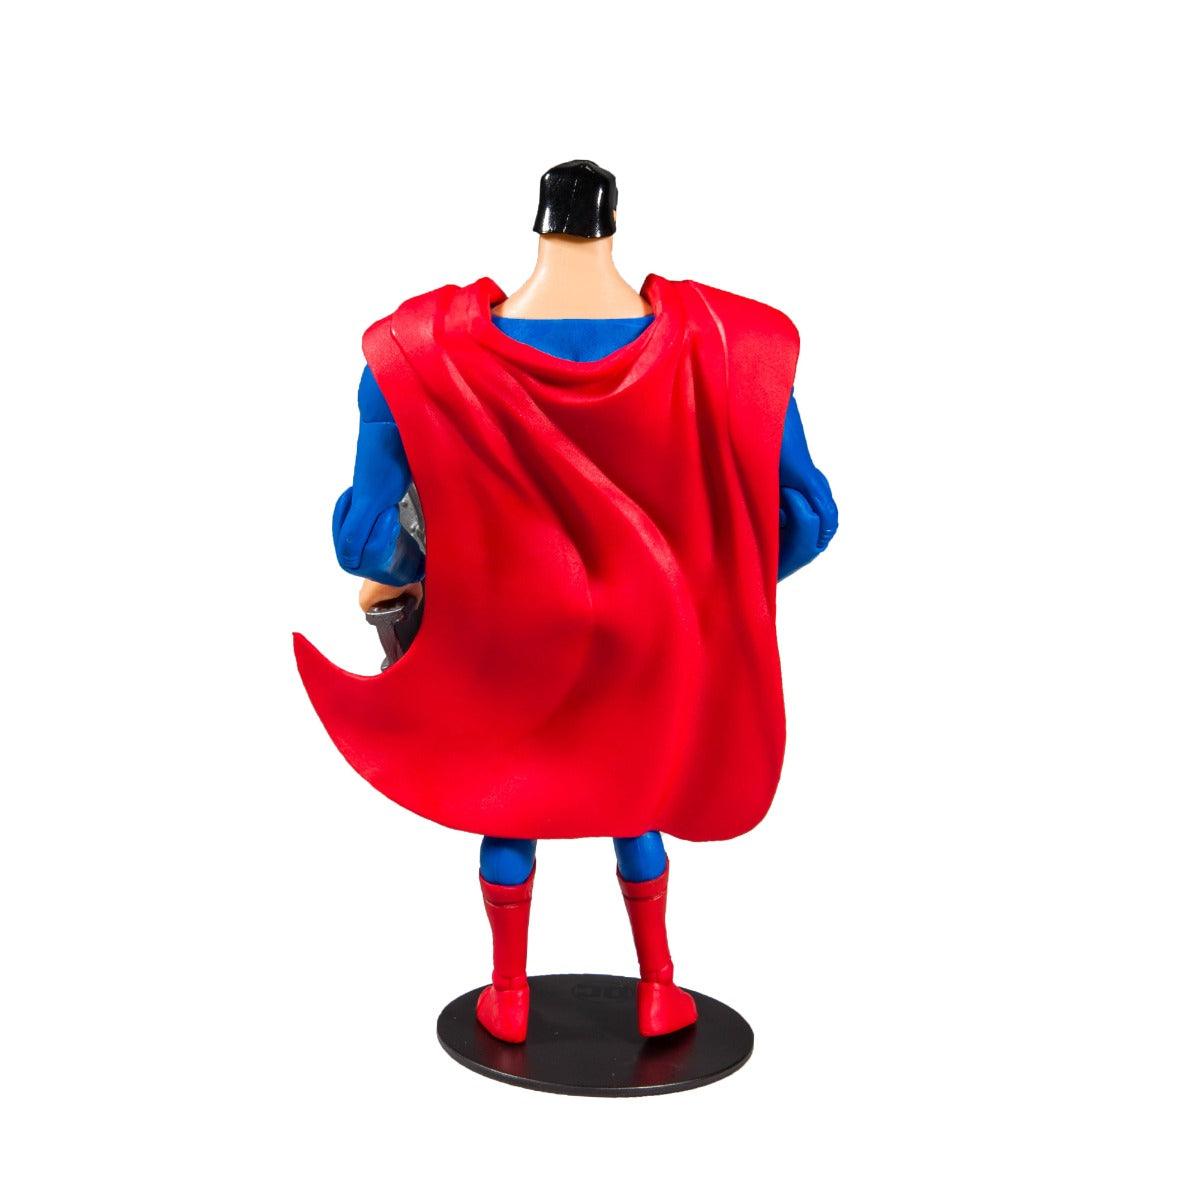 McFarlane Toys DC Animated Superman: The Animated Series Superman 7-Inch Action Figure